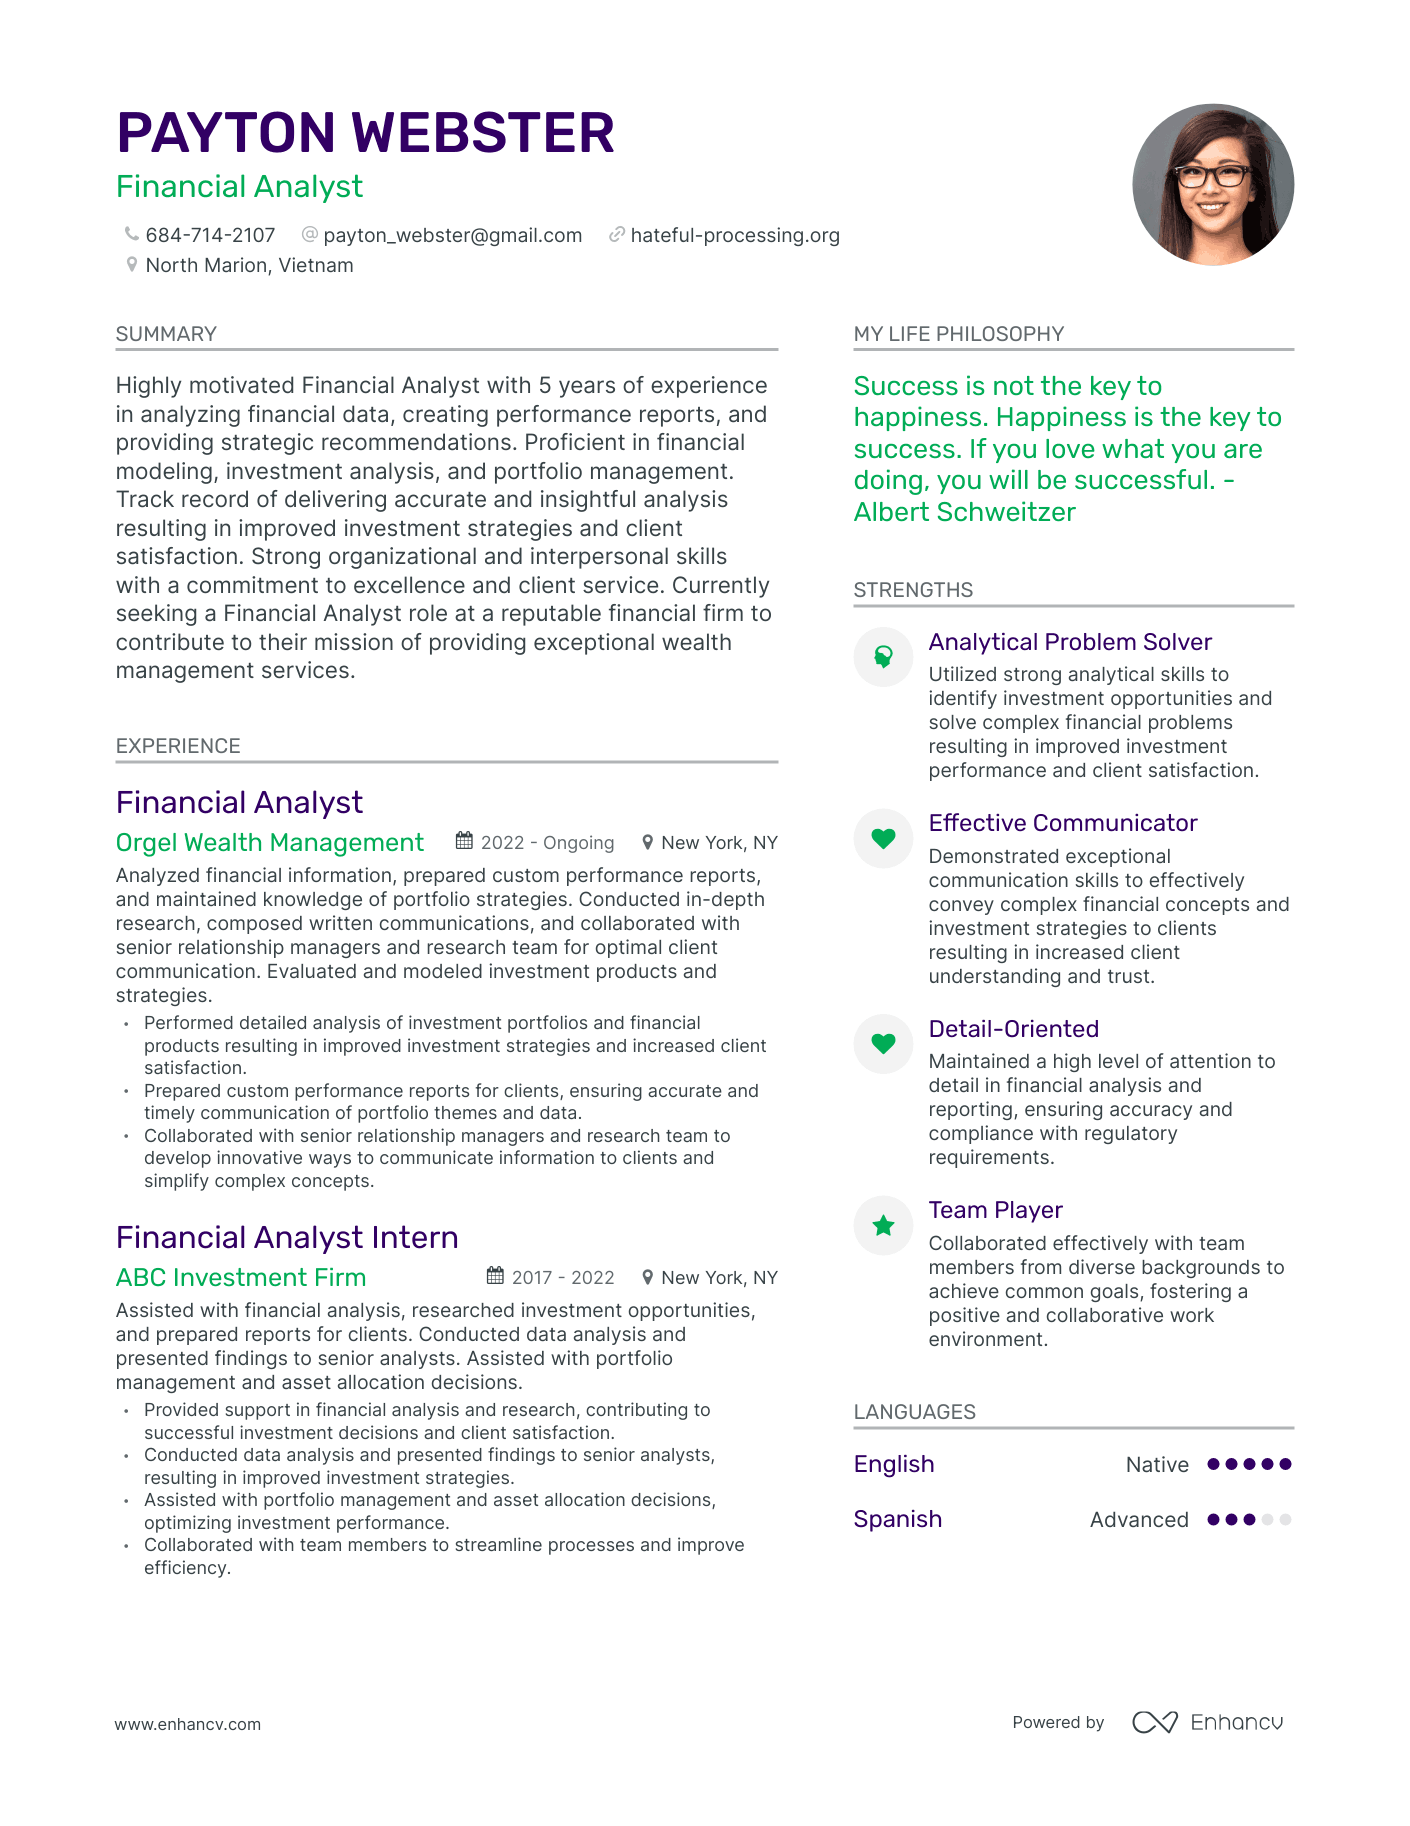 Financial Analyst resume example